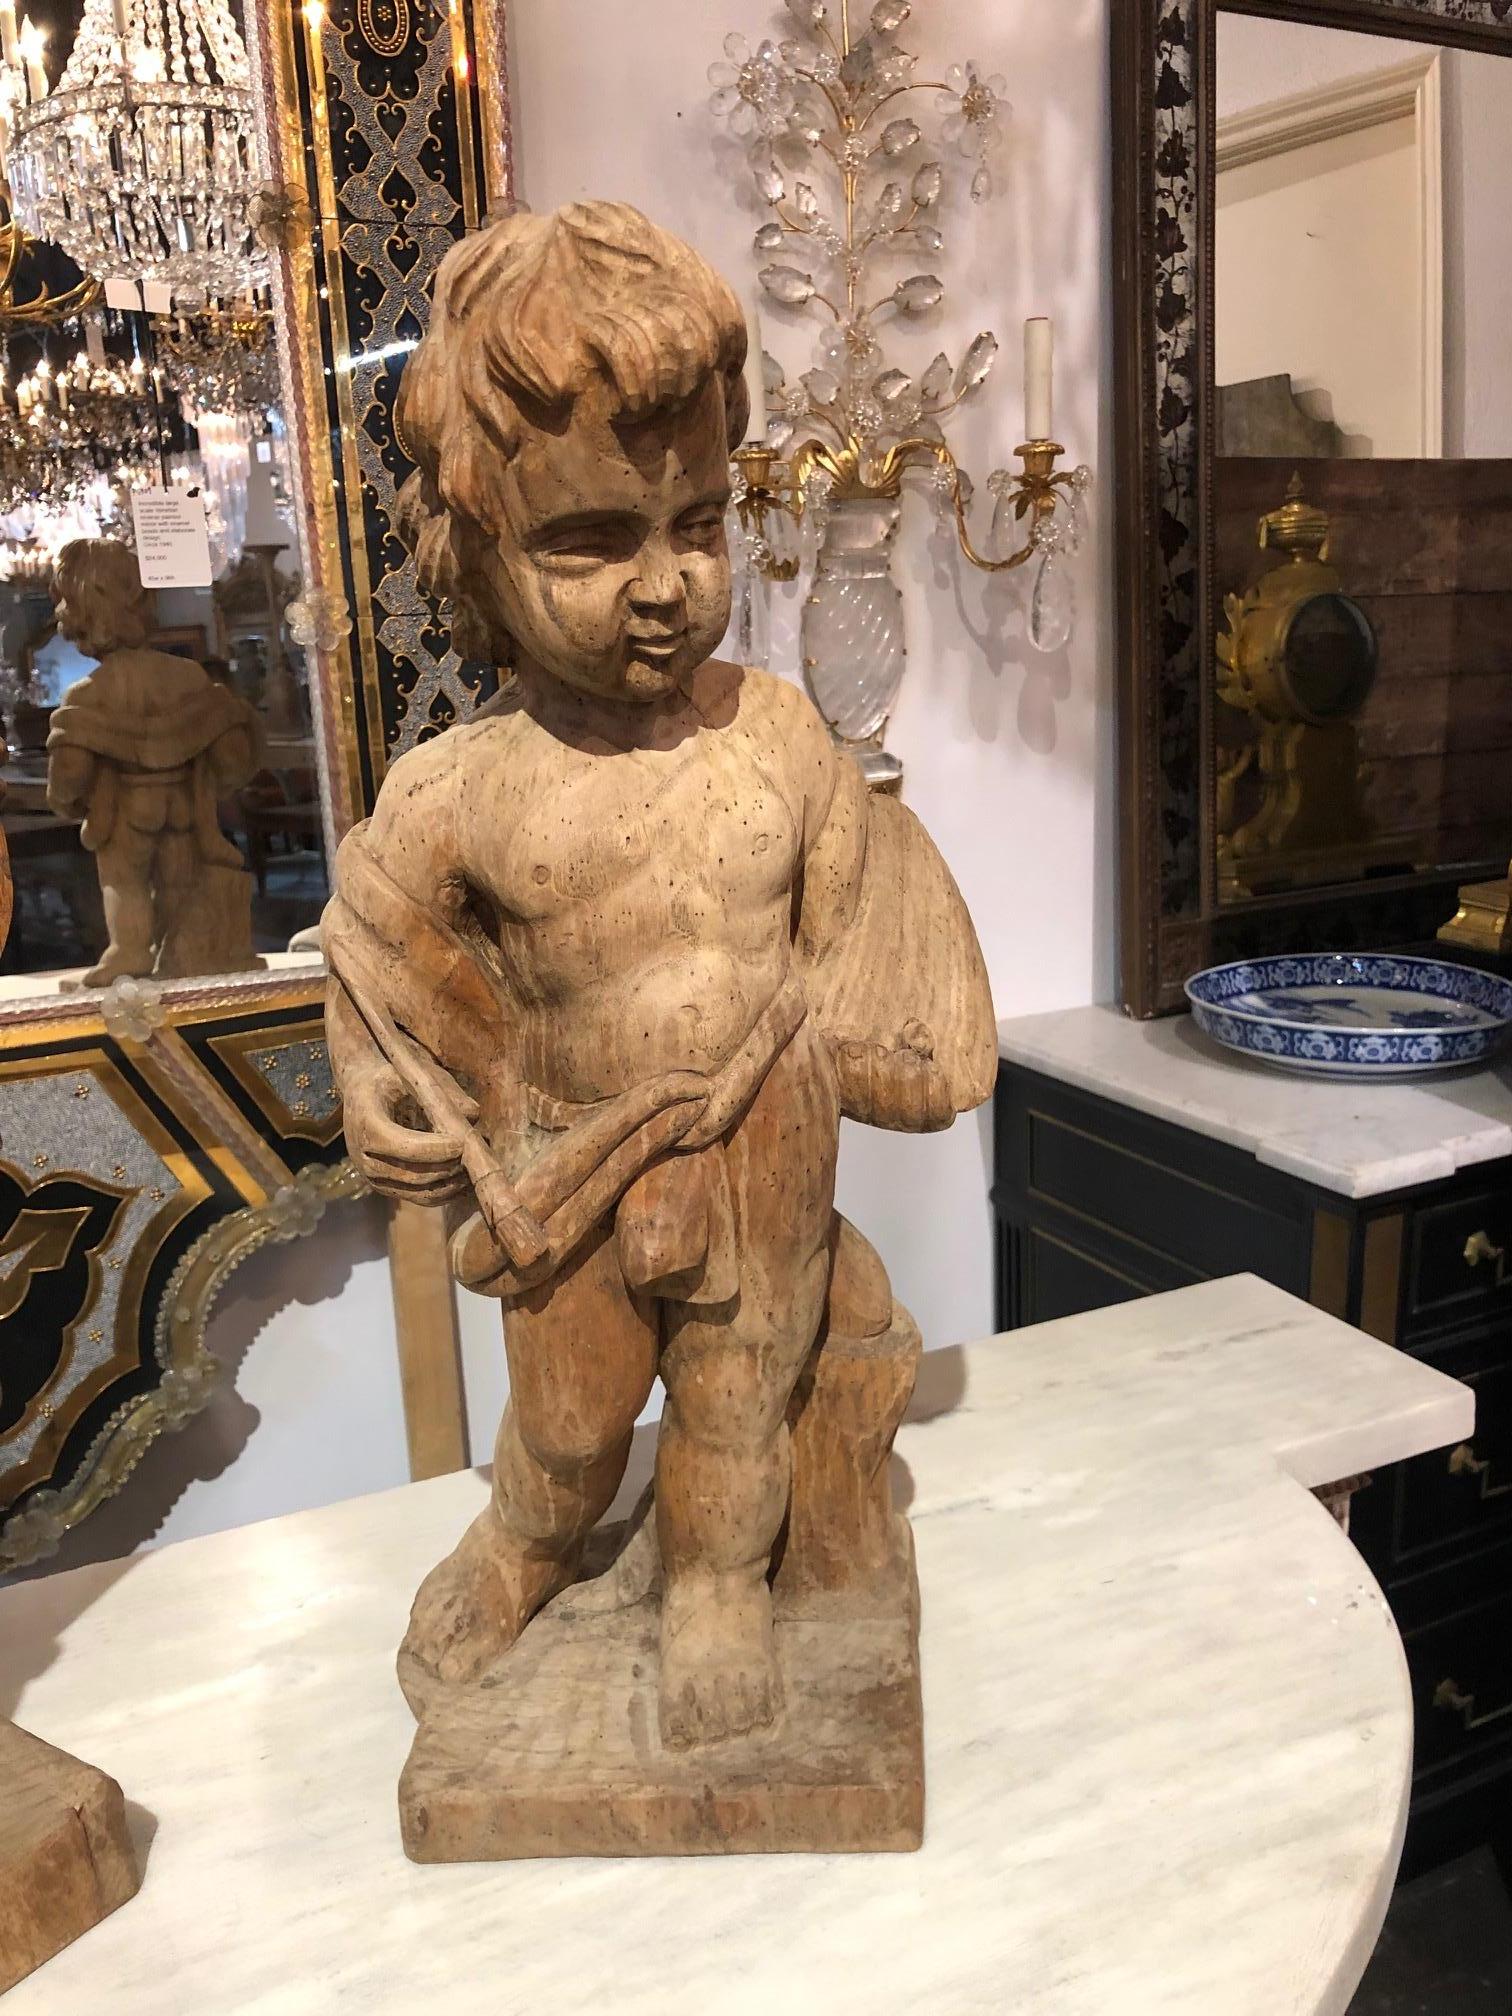 Pair of musical cherubs hand-carved in Italy out of bleached walnut.
Measures: 22